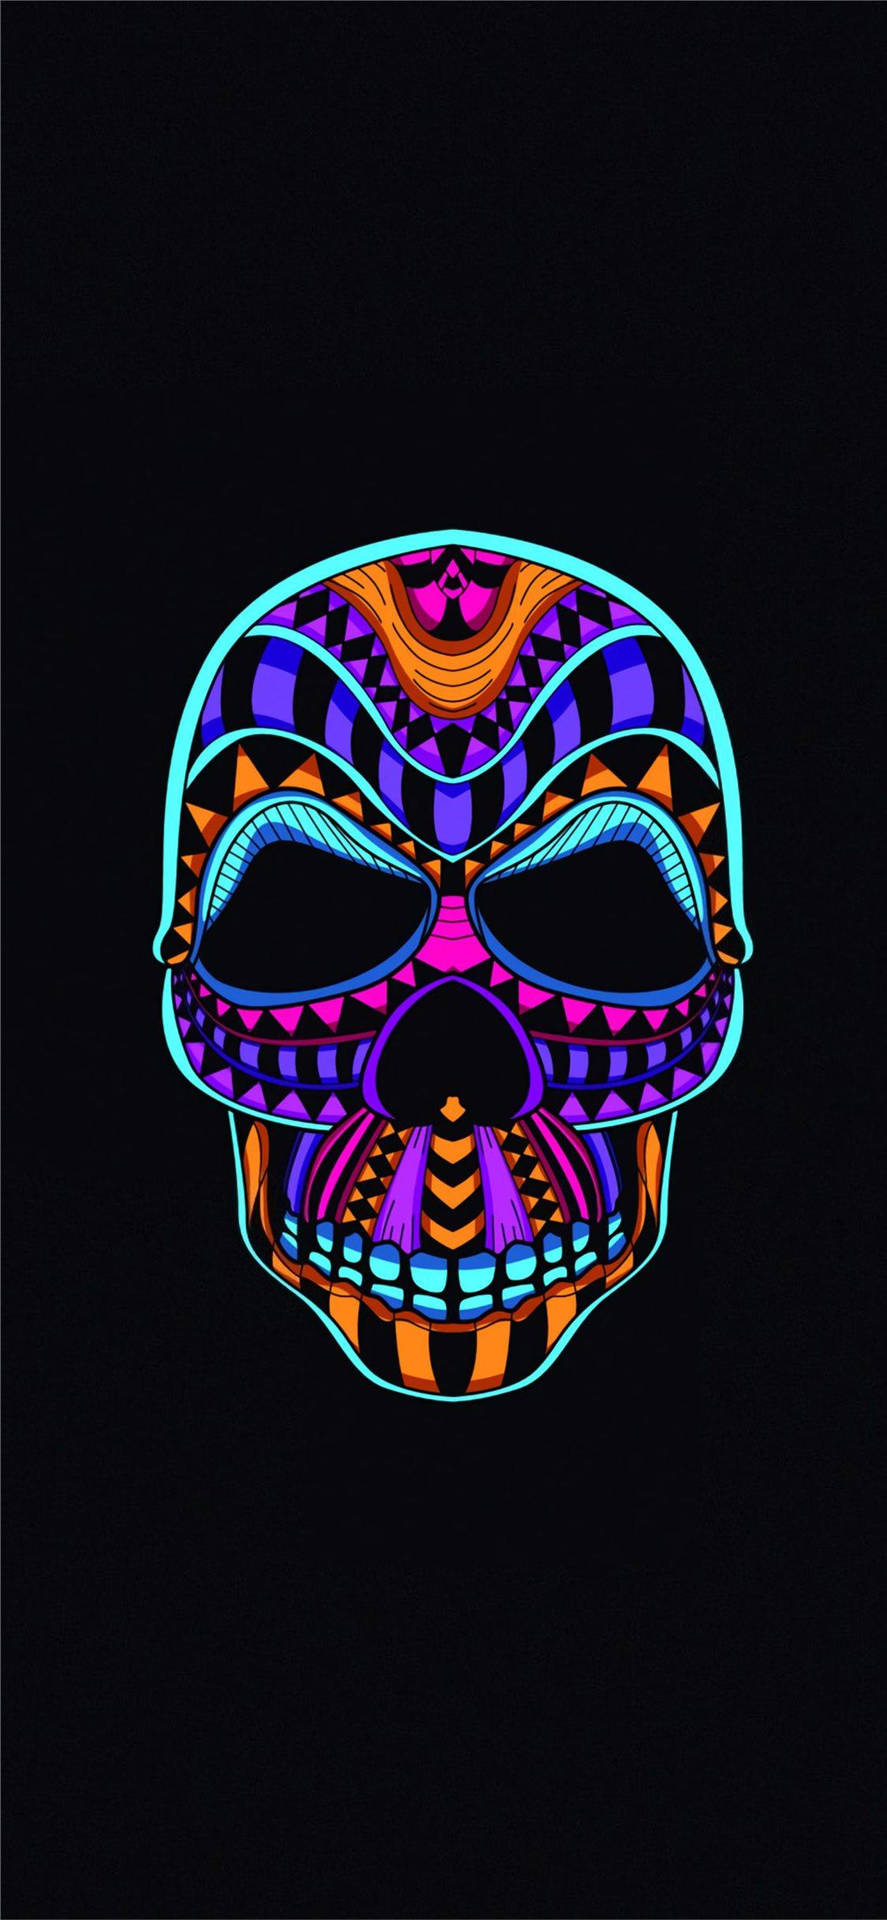 Bästaoled Färgglada Neon Skull. (note: This Is A Direct Translation, But It May Not Make Complete Sense In Swedish As A Product Name. It May Be Better To Translate It More Descriptively, Such As 